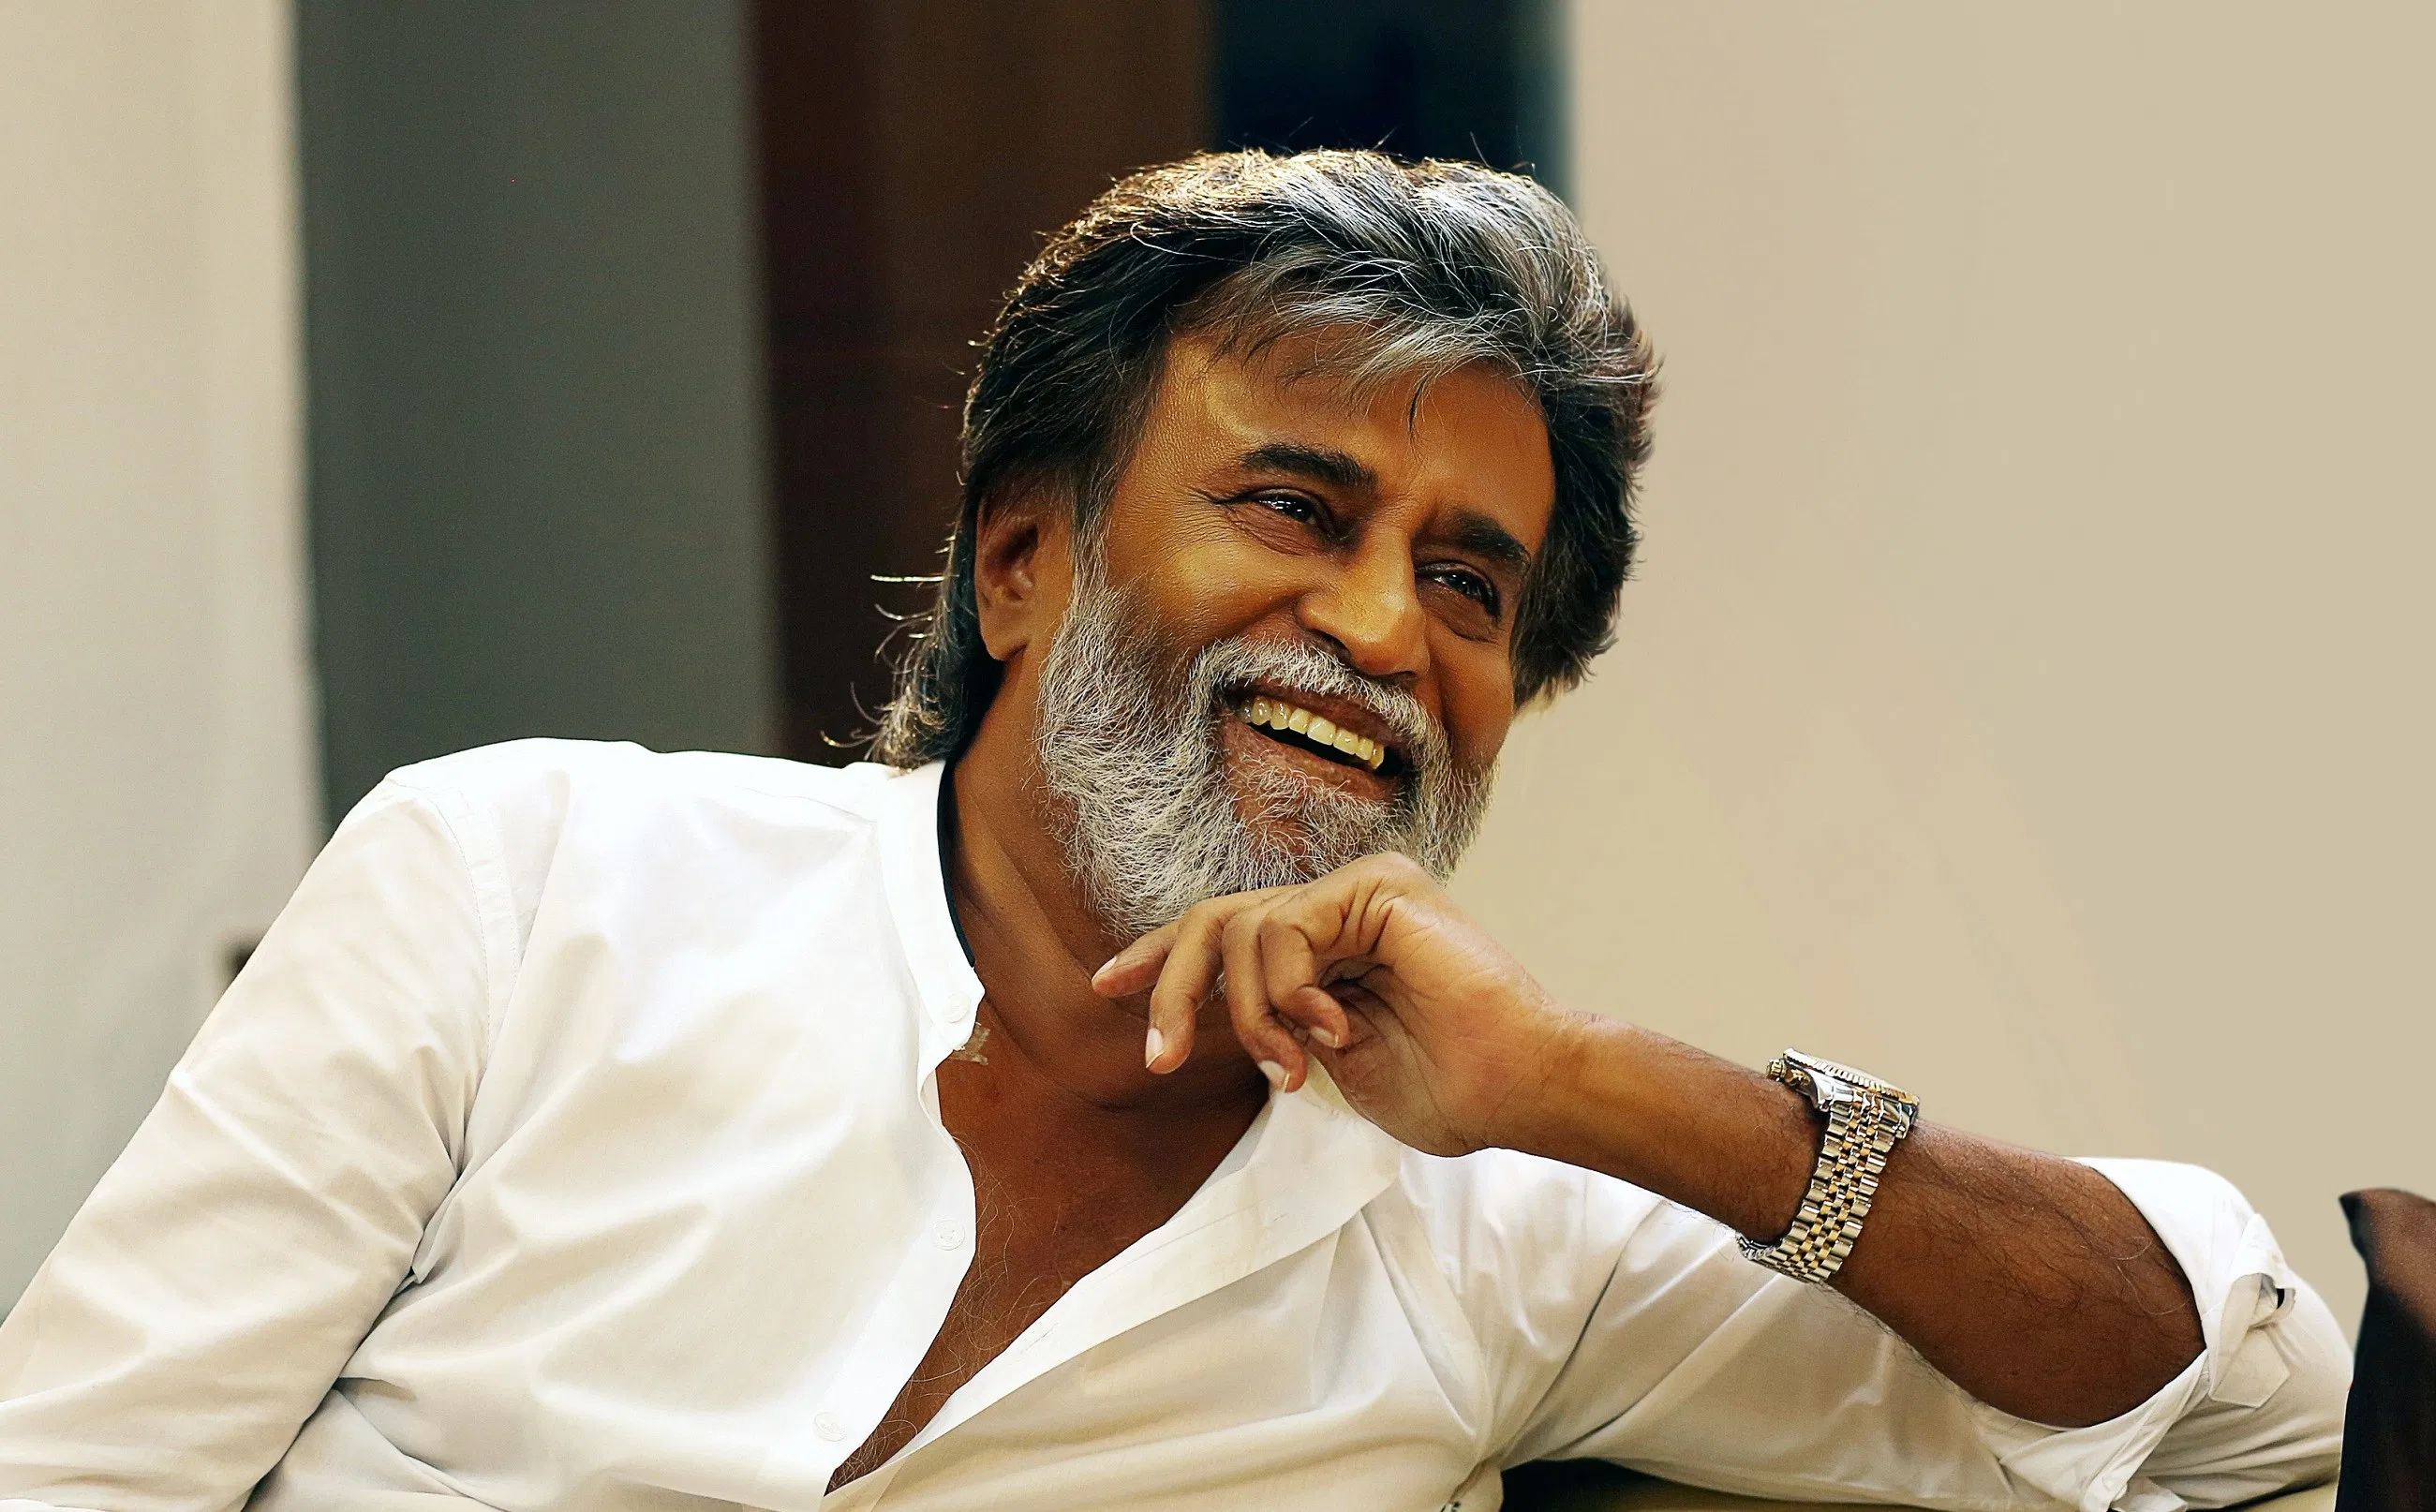 What is the real name of Rajnikanth?